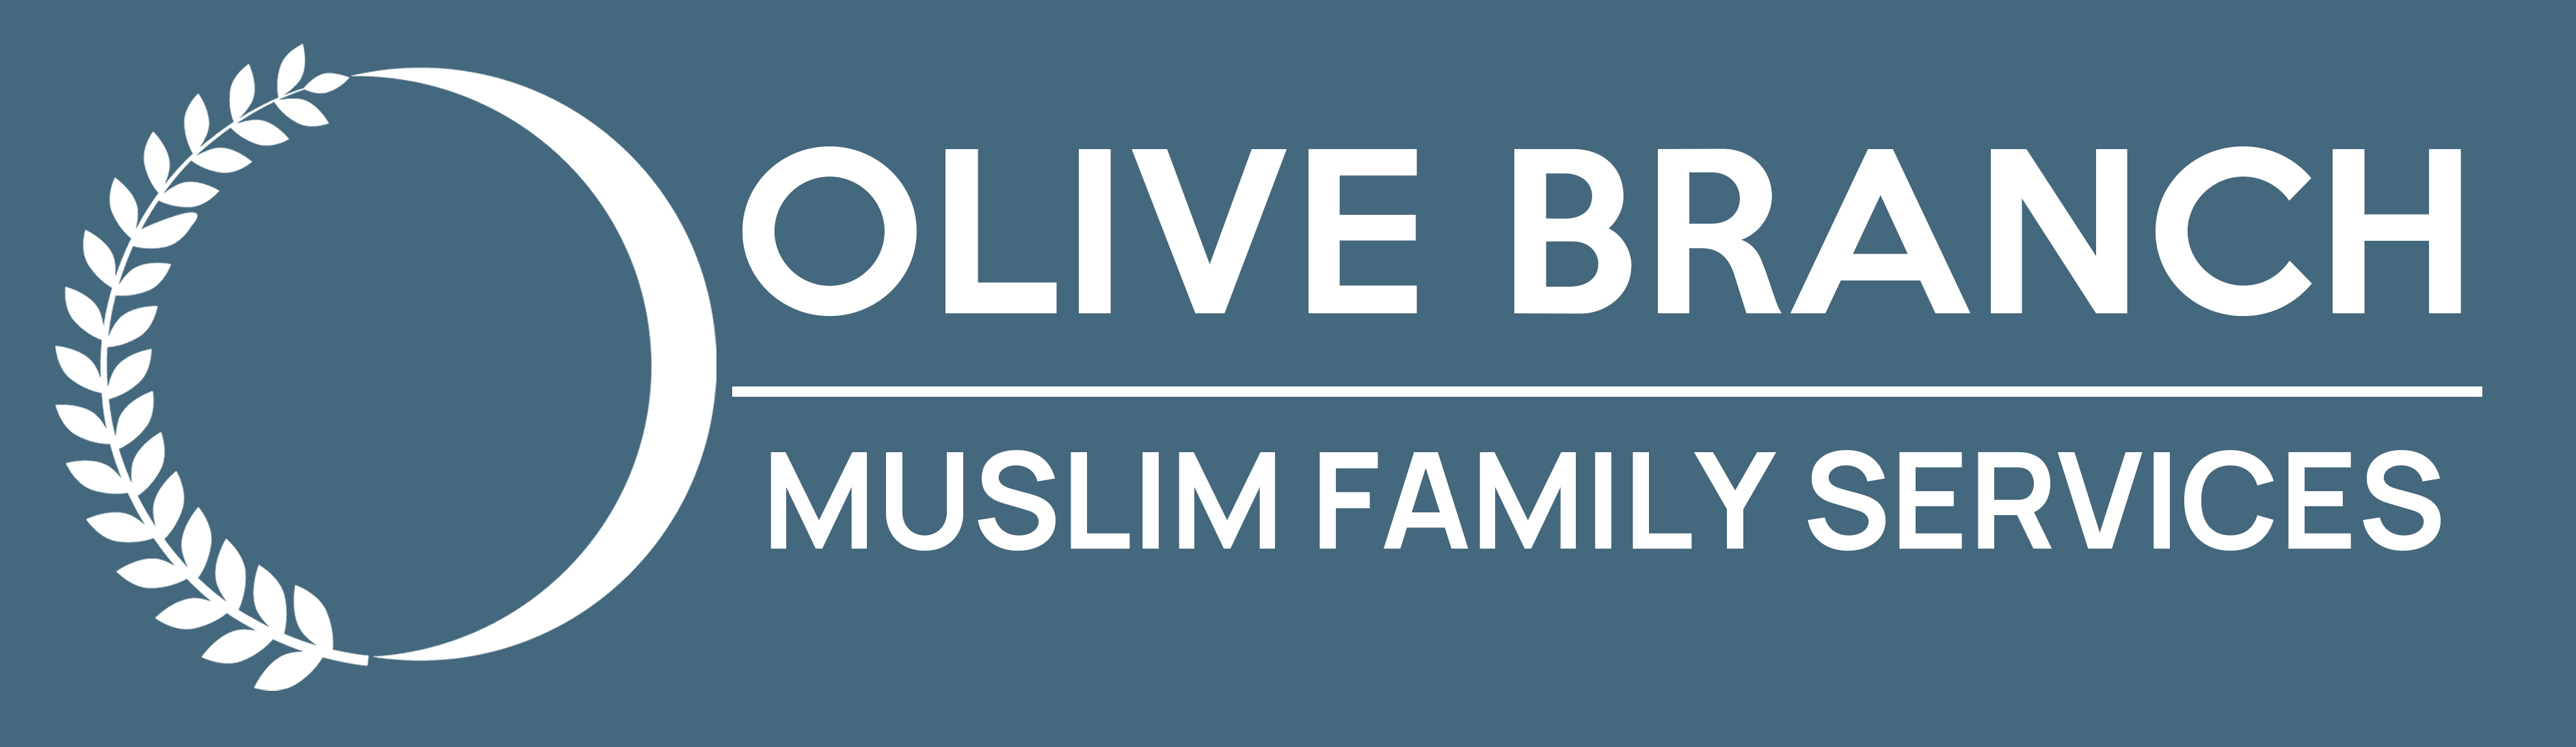 Olive Branch Muslim Family Services